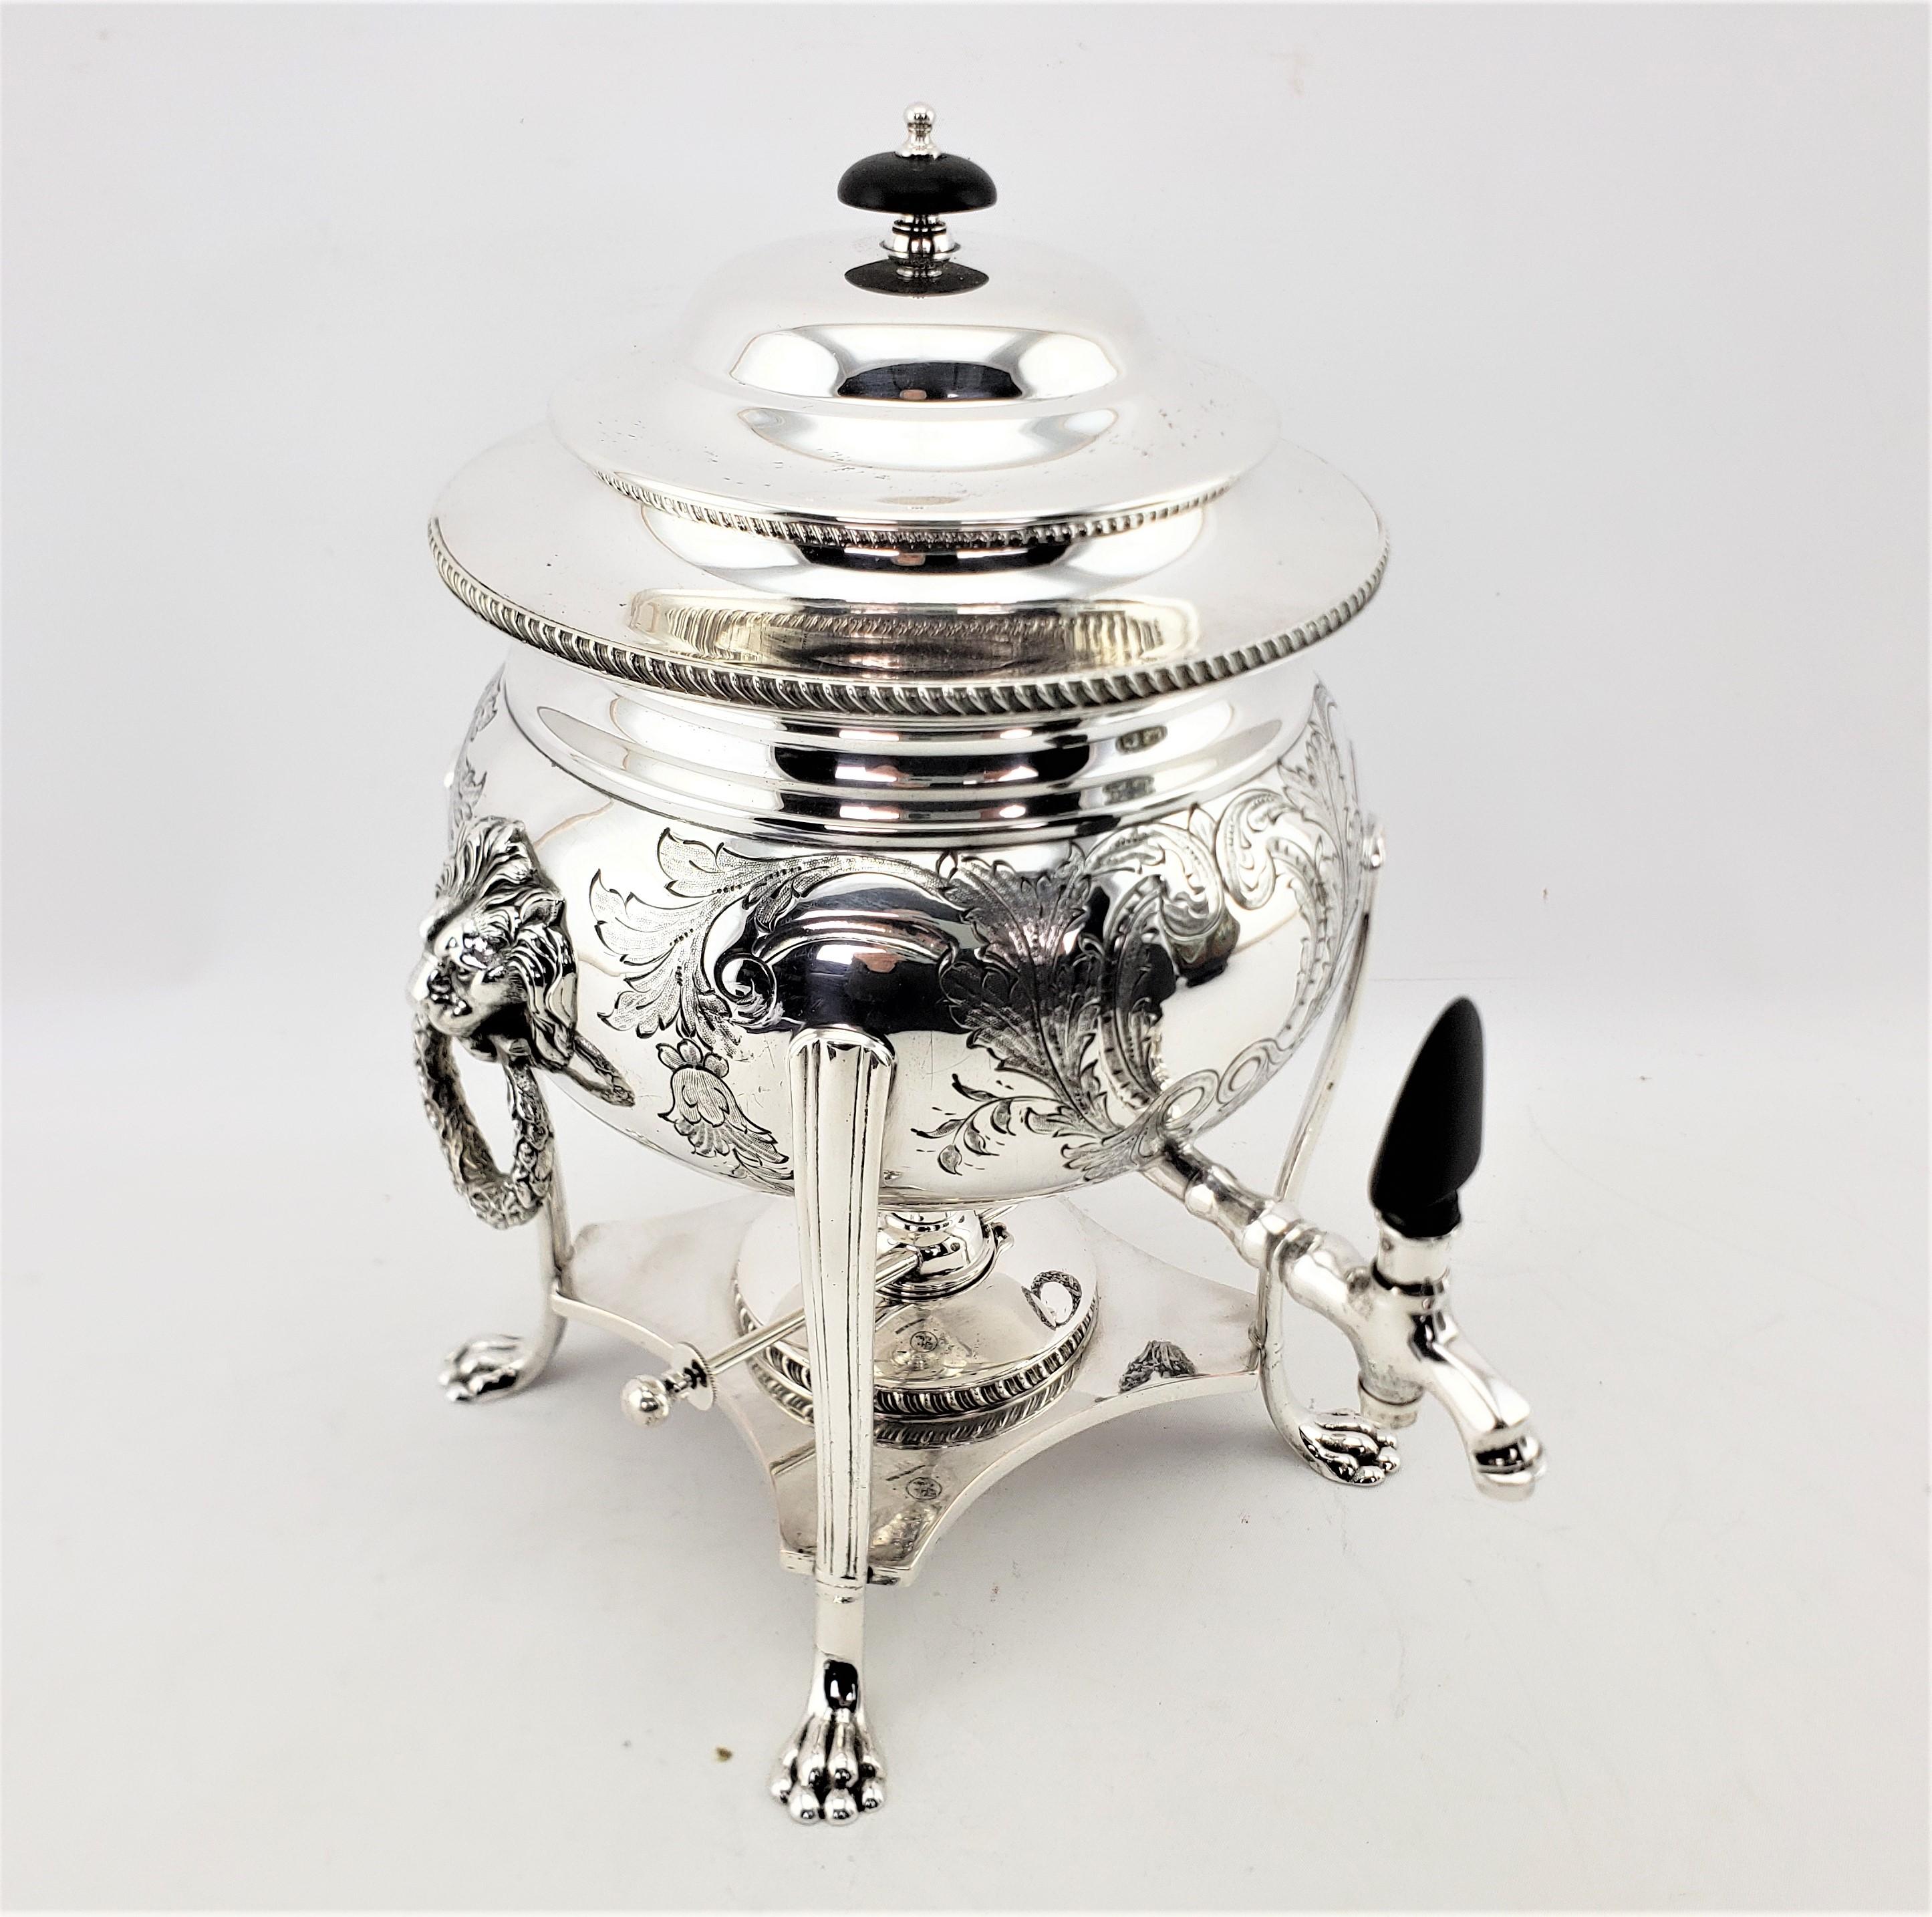 This small silver plated tea or hot water urn is hallmarked by an unknown maker, but clearly identified as originating from England and dating to approximately 1920 and done in a Victorian style. The urn has a round top with a wooden handle and